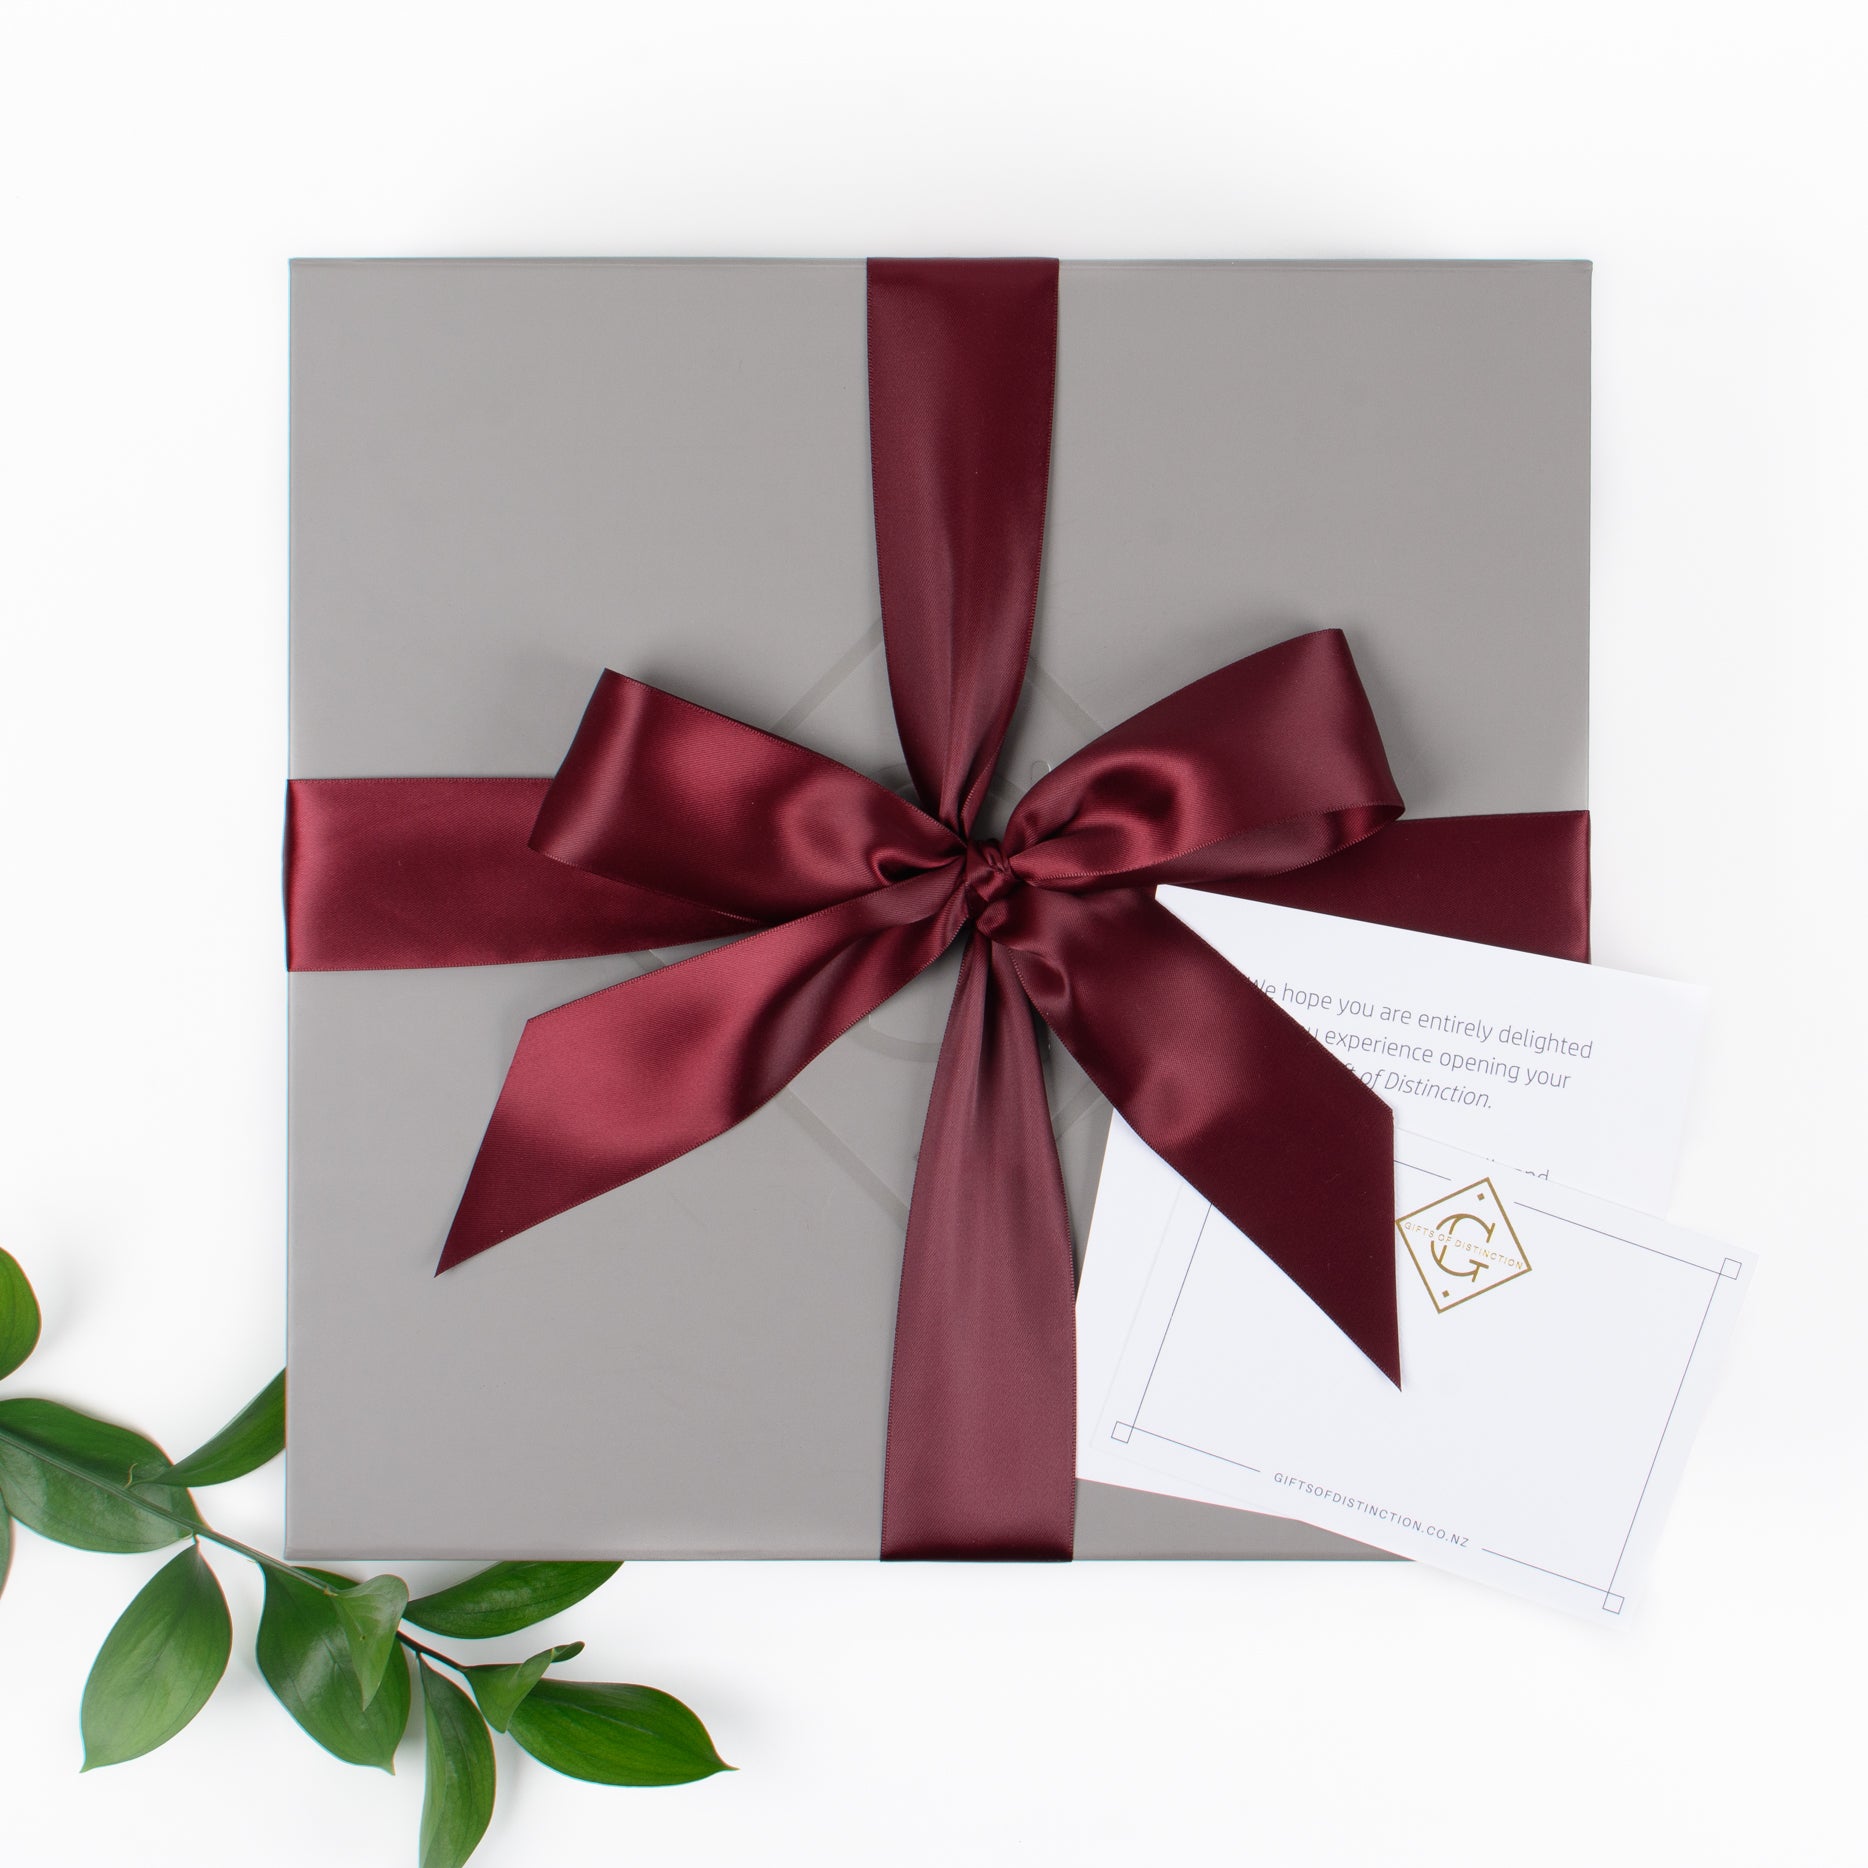 New Home - Gift Boxes NZ - Gifts of Distinction